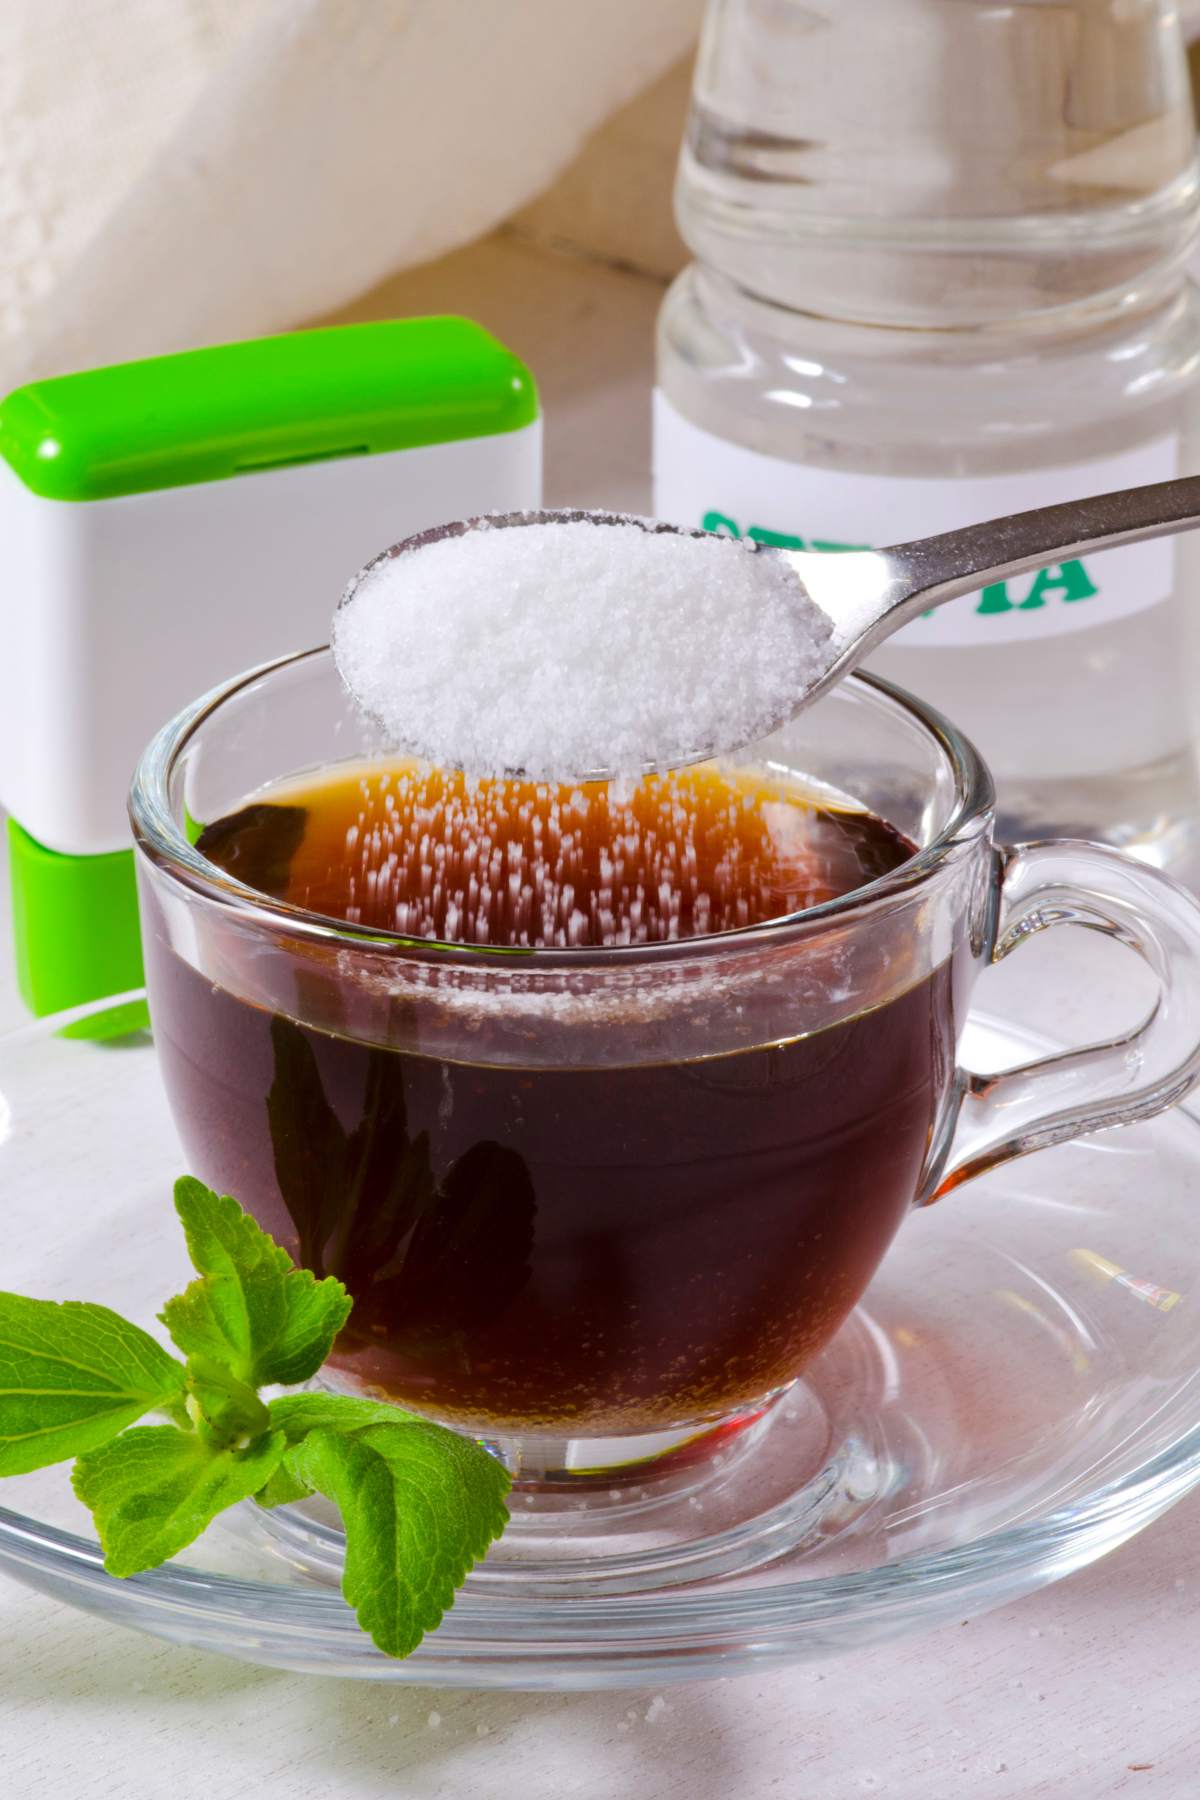 Is stevia keto-friendly? How many carbs are in stevia? Learning which sugar and sugar alternatives are suitable can be tricky when following a keto diet. In this article, you’ll find everything you need to know about this keto sweetener.